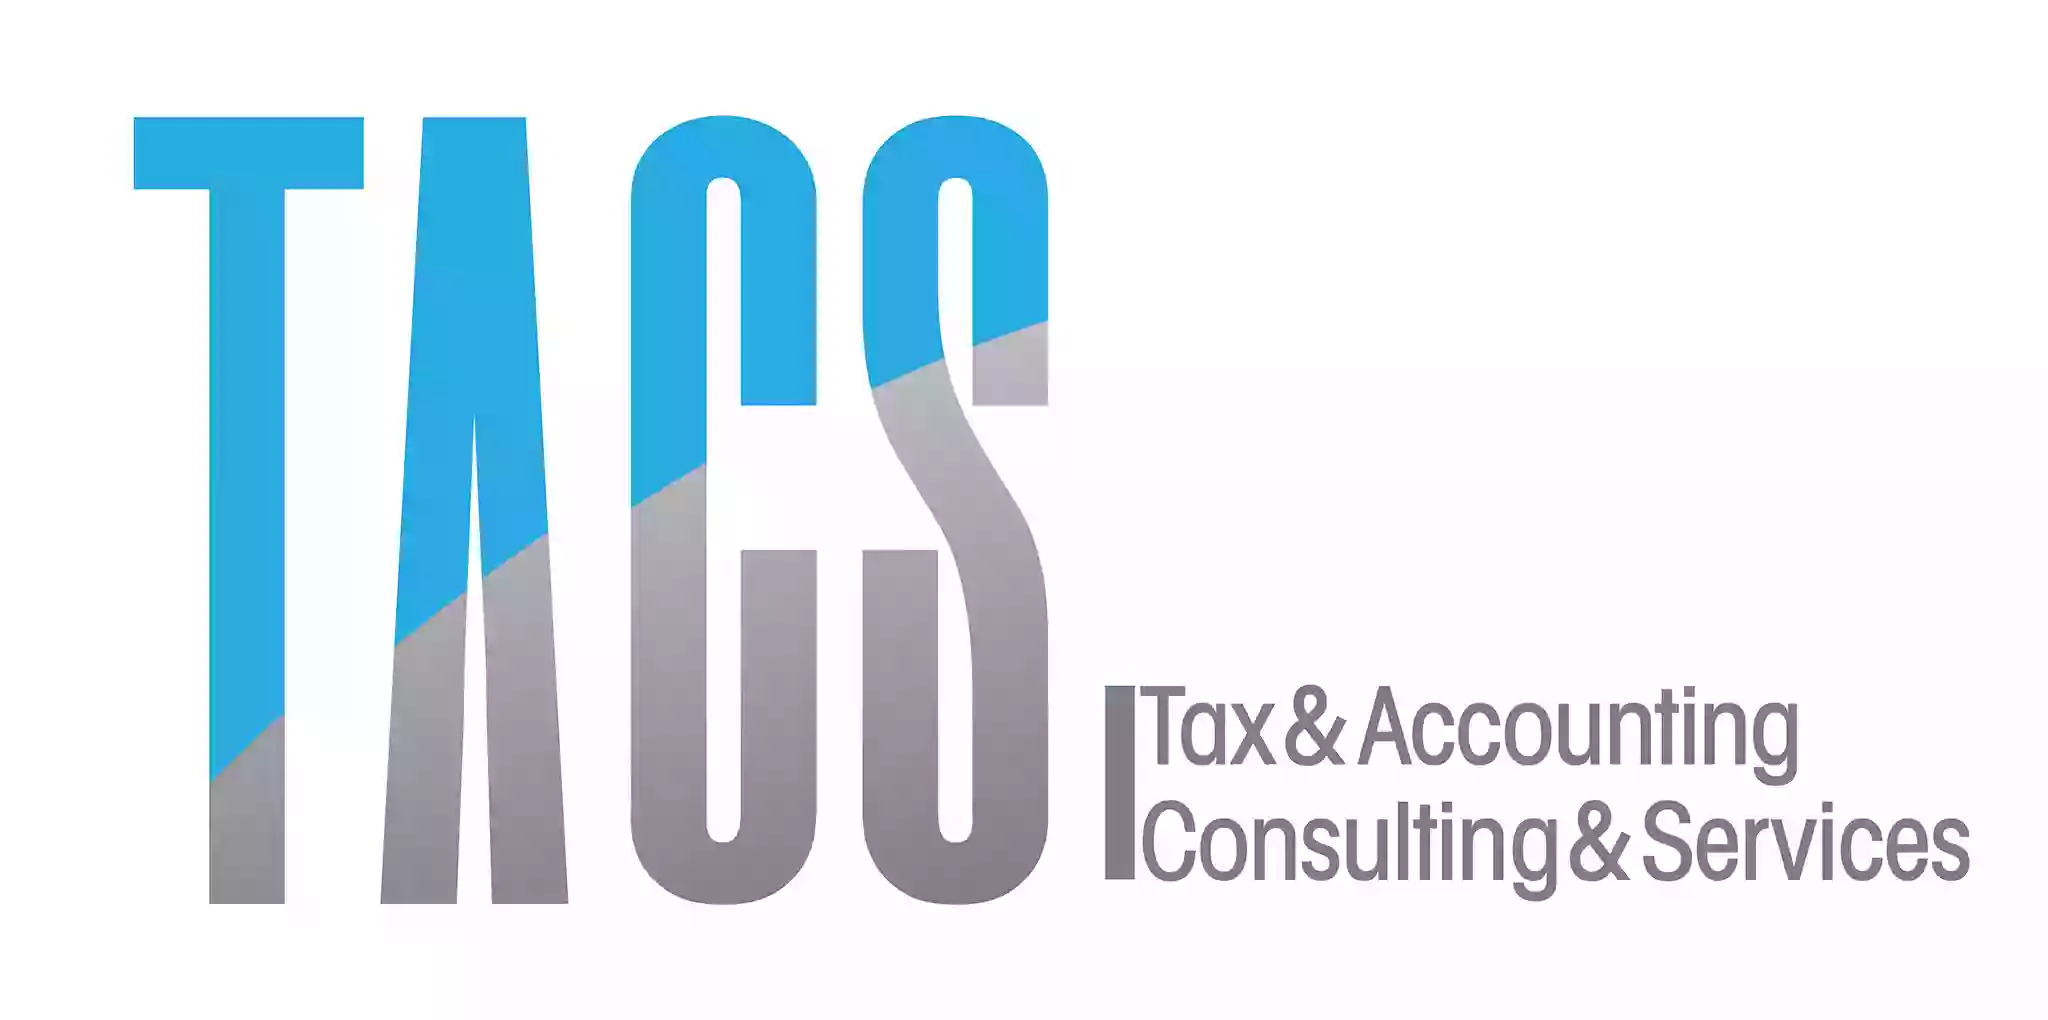 TACS Tax & Accounting Consulting & Services